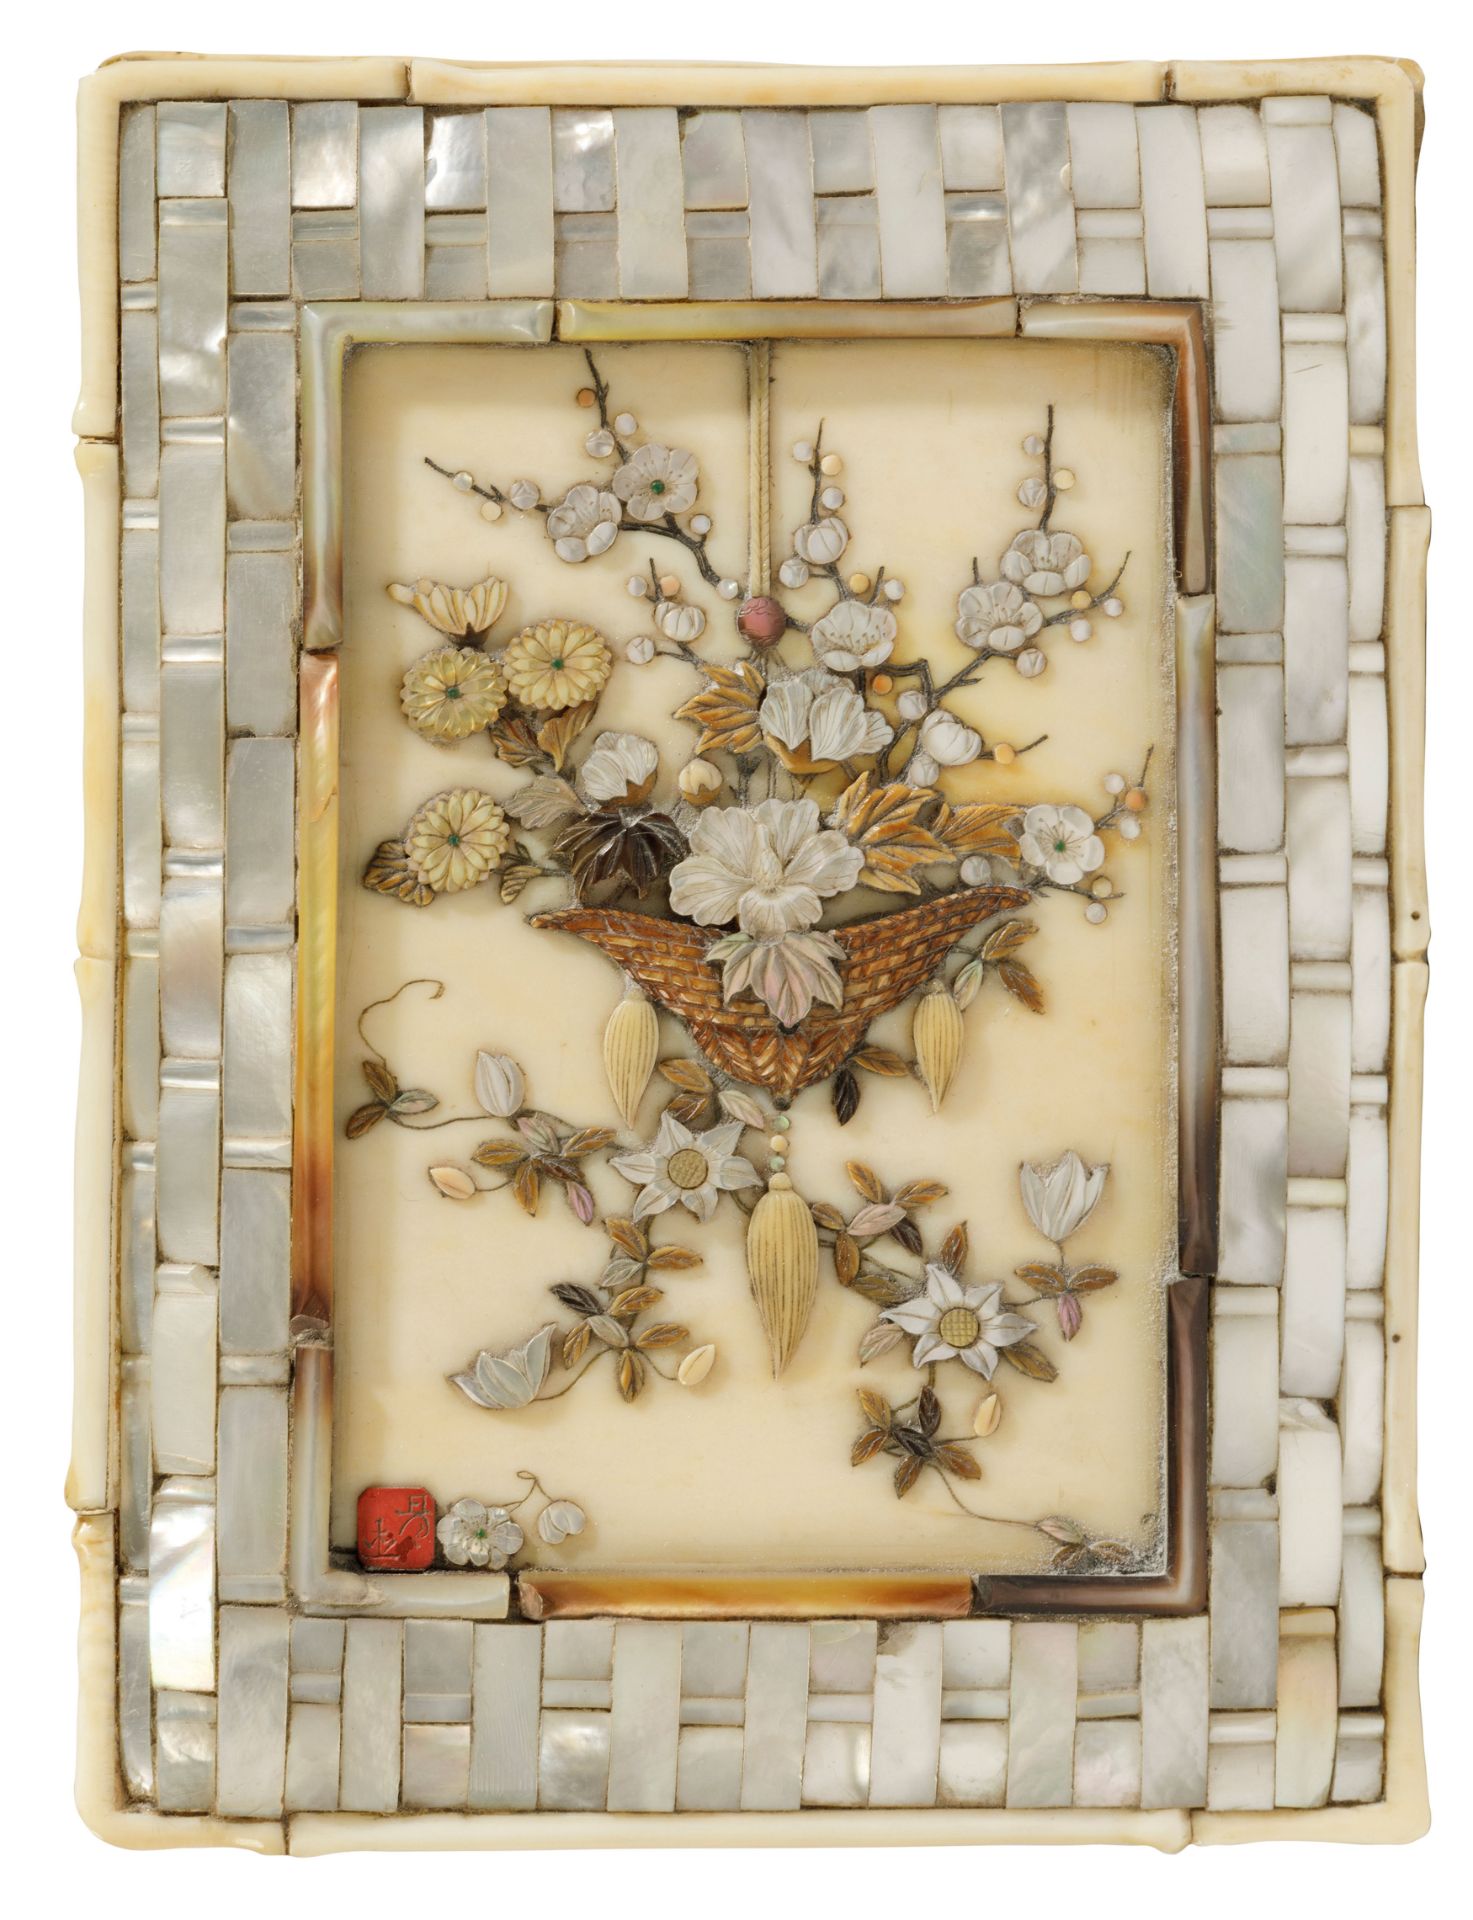 A SHIBAYAMA INLAID IVORY, MOTHER-OF-PEARL AND WOOD BOX AND COVER, MEIJI PERIOD, 19TH CENTURY - Image 2 of 3